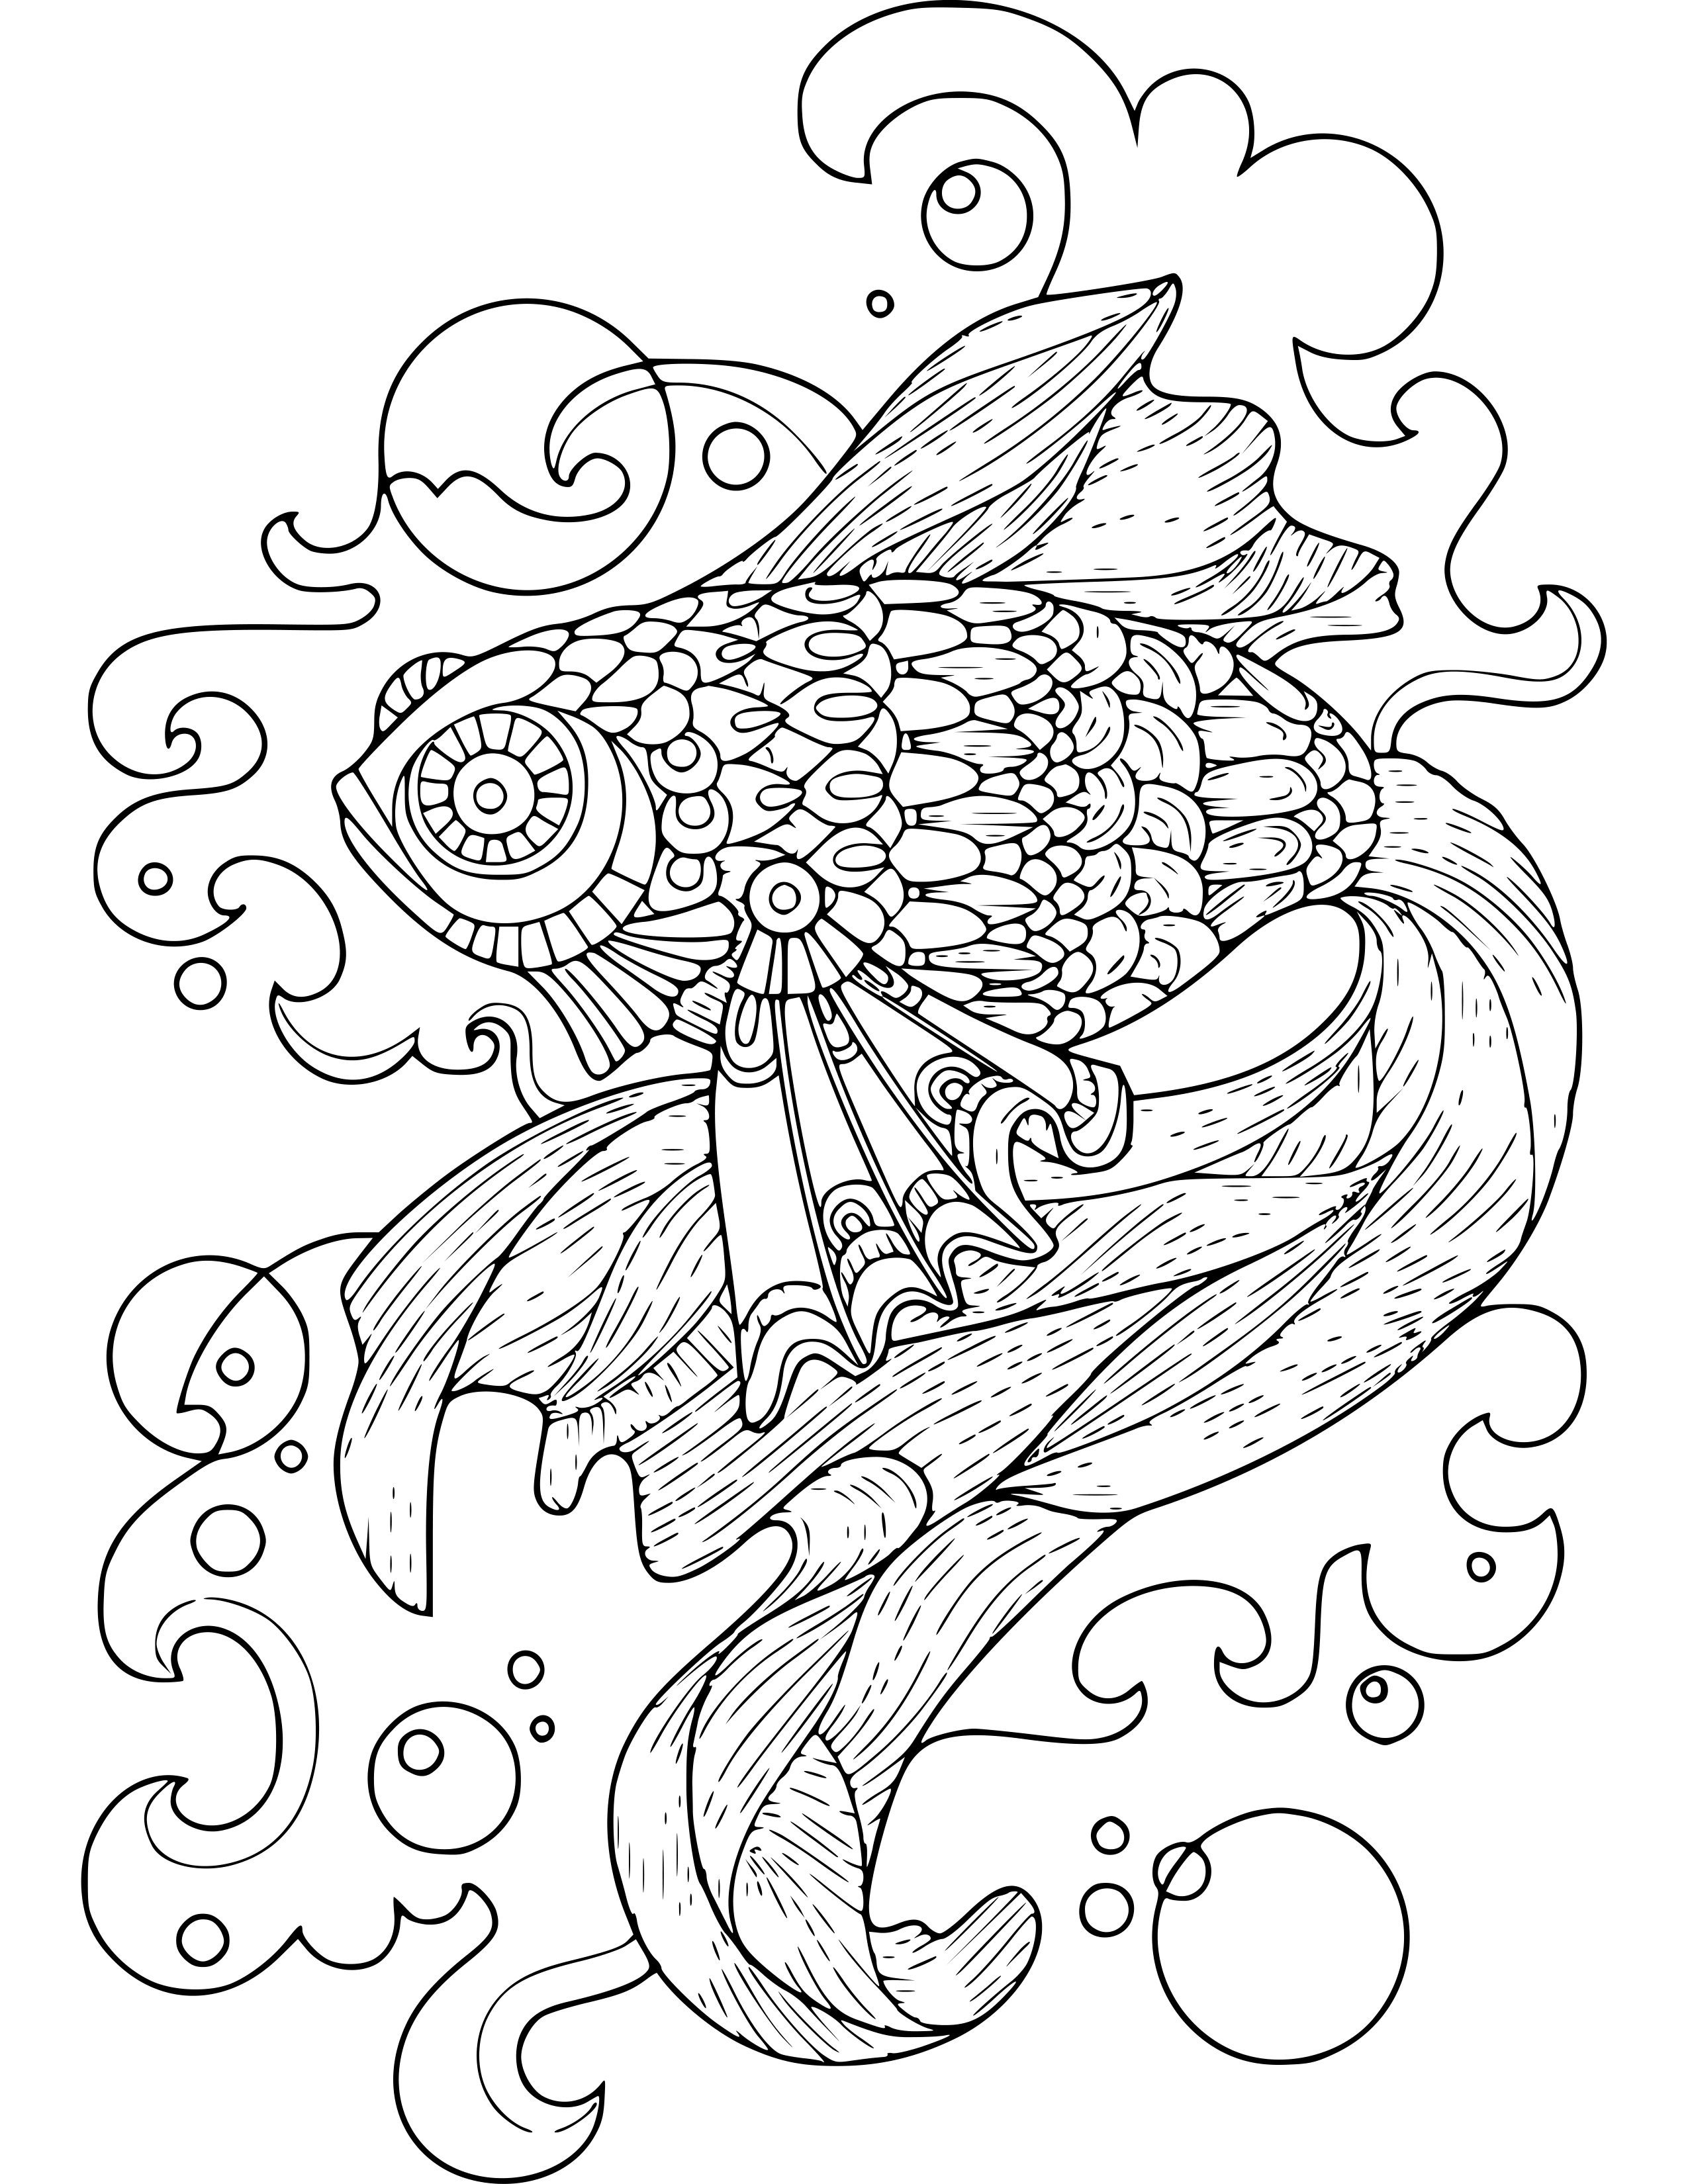 60-animal-coloring-pages-for-adults-with-resell-right-for-15-seoclerks